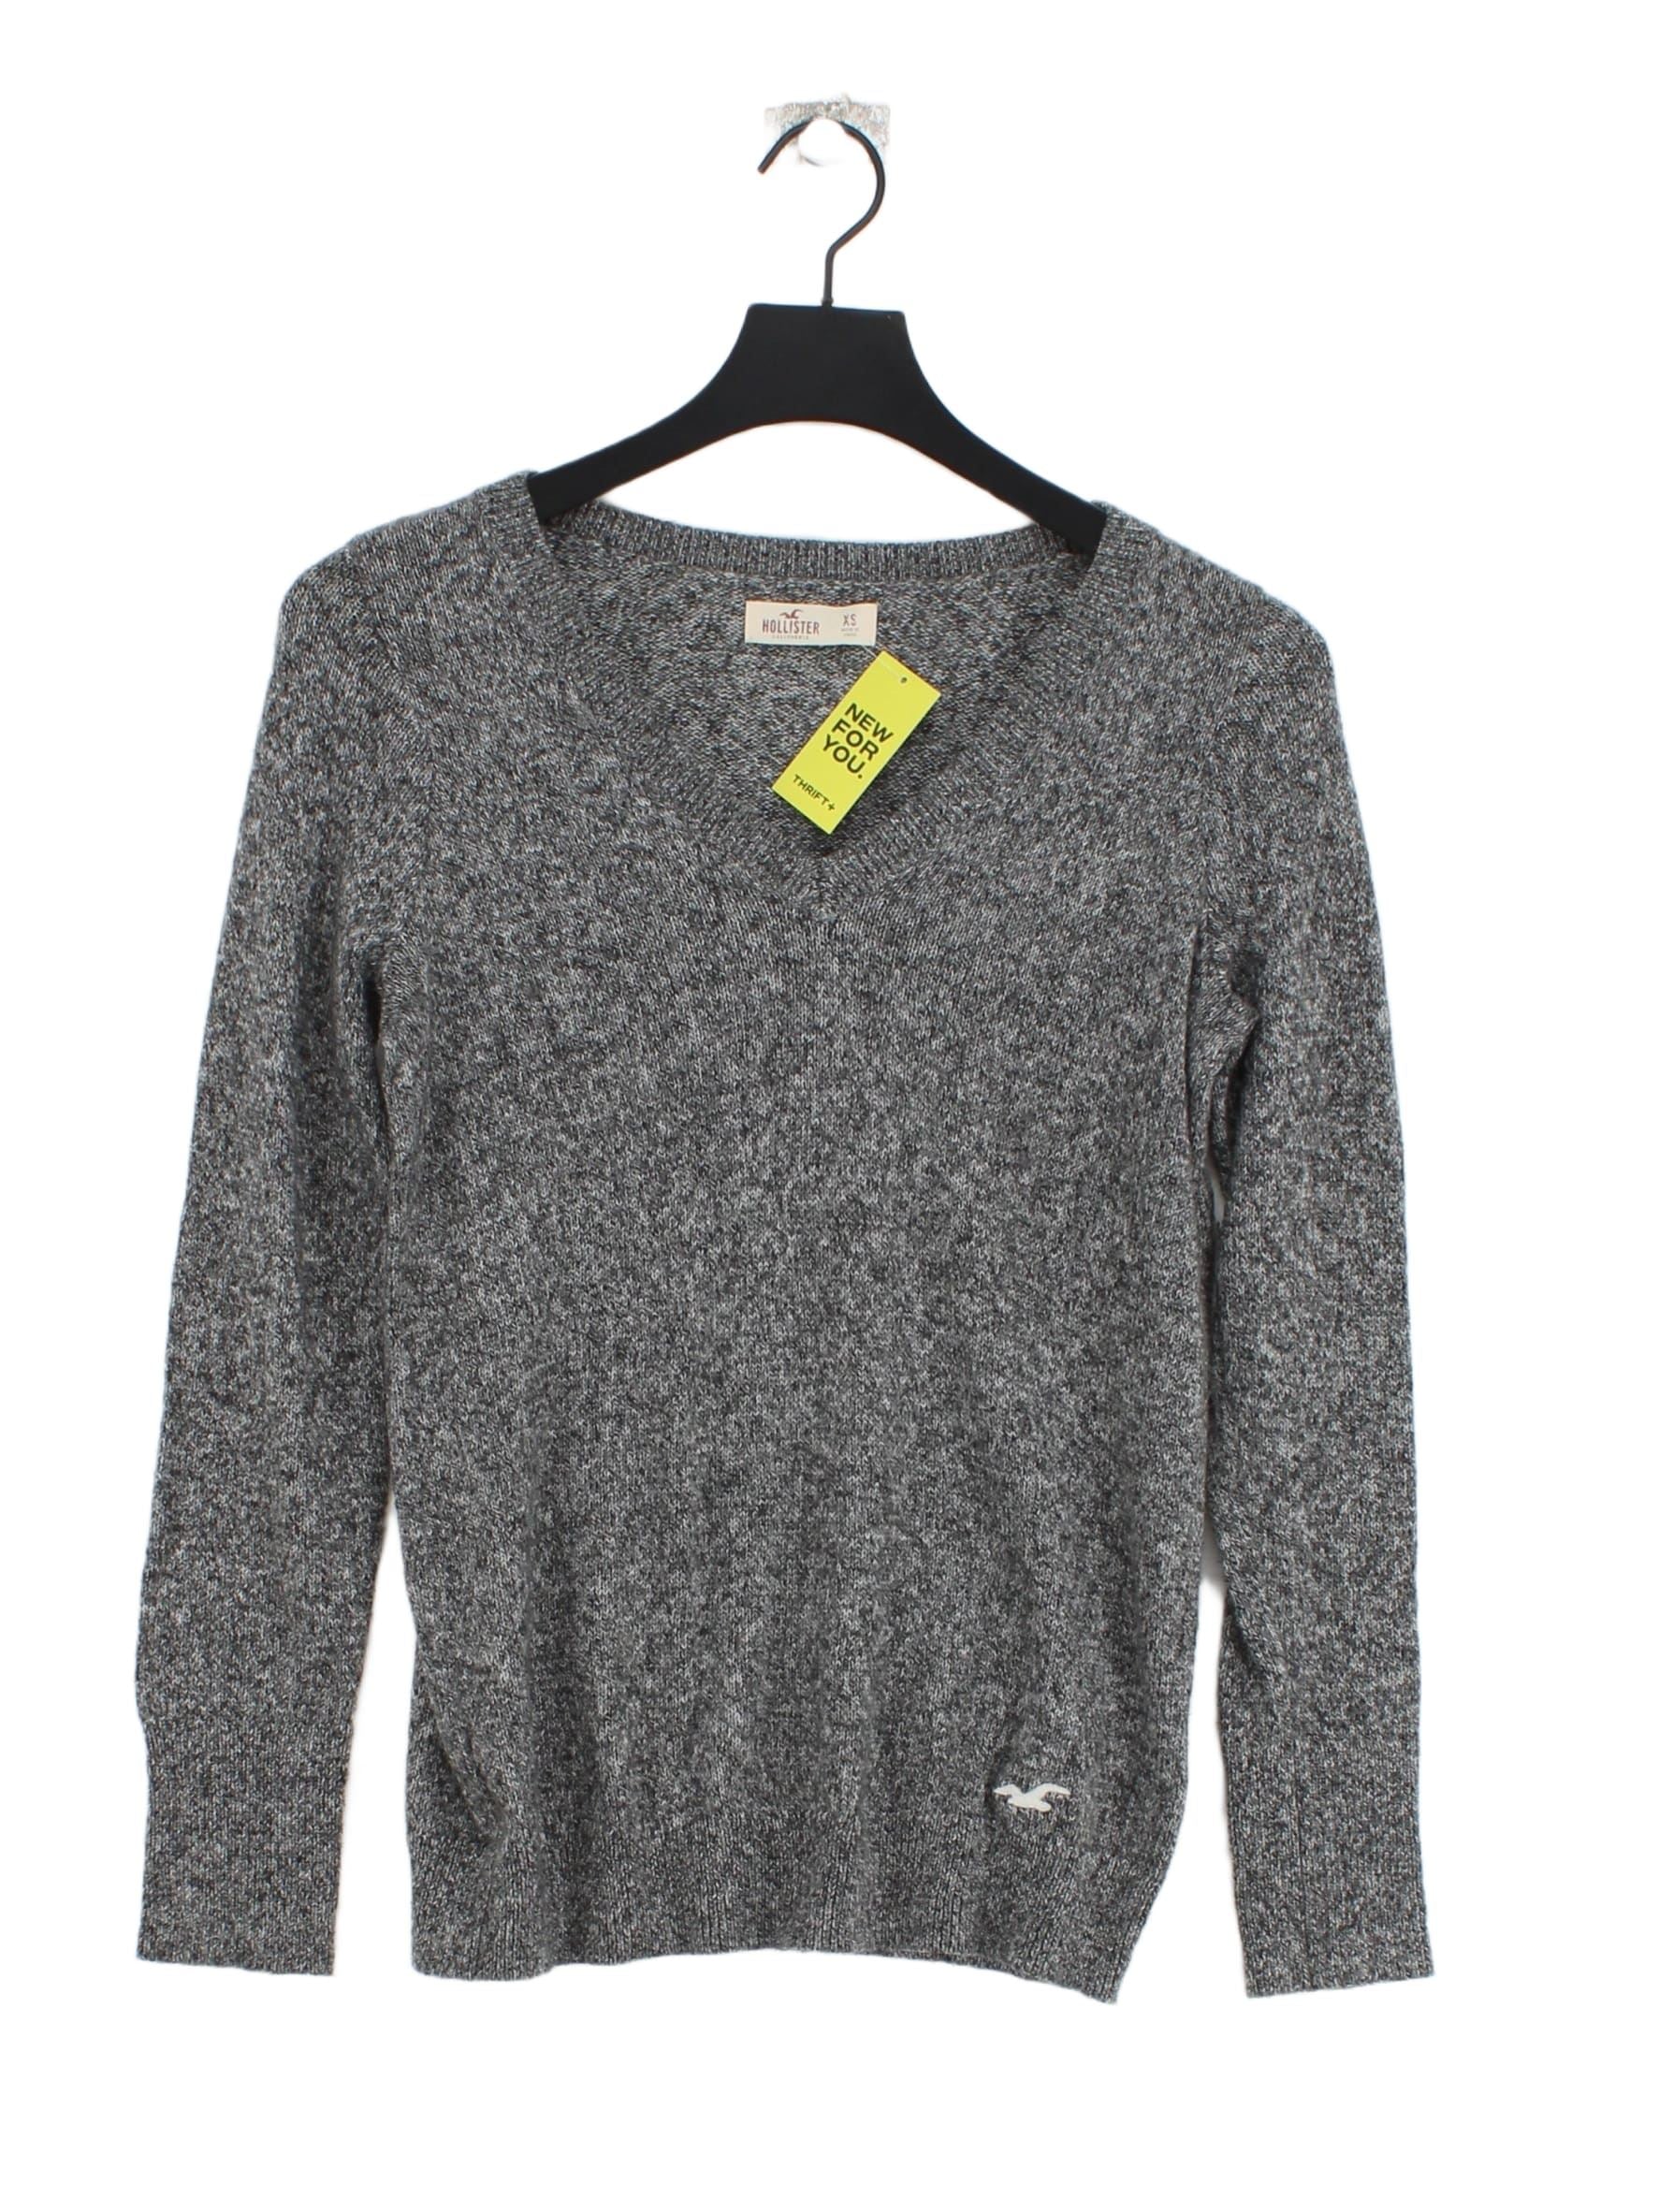 Hollister women's sweater Gray Size M - $12 (70% Off Retail) - From lexie